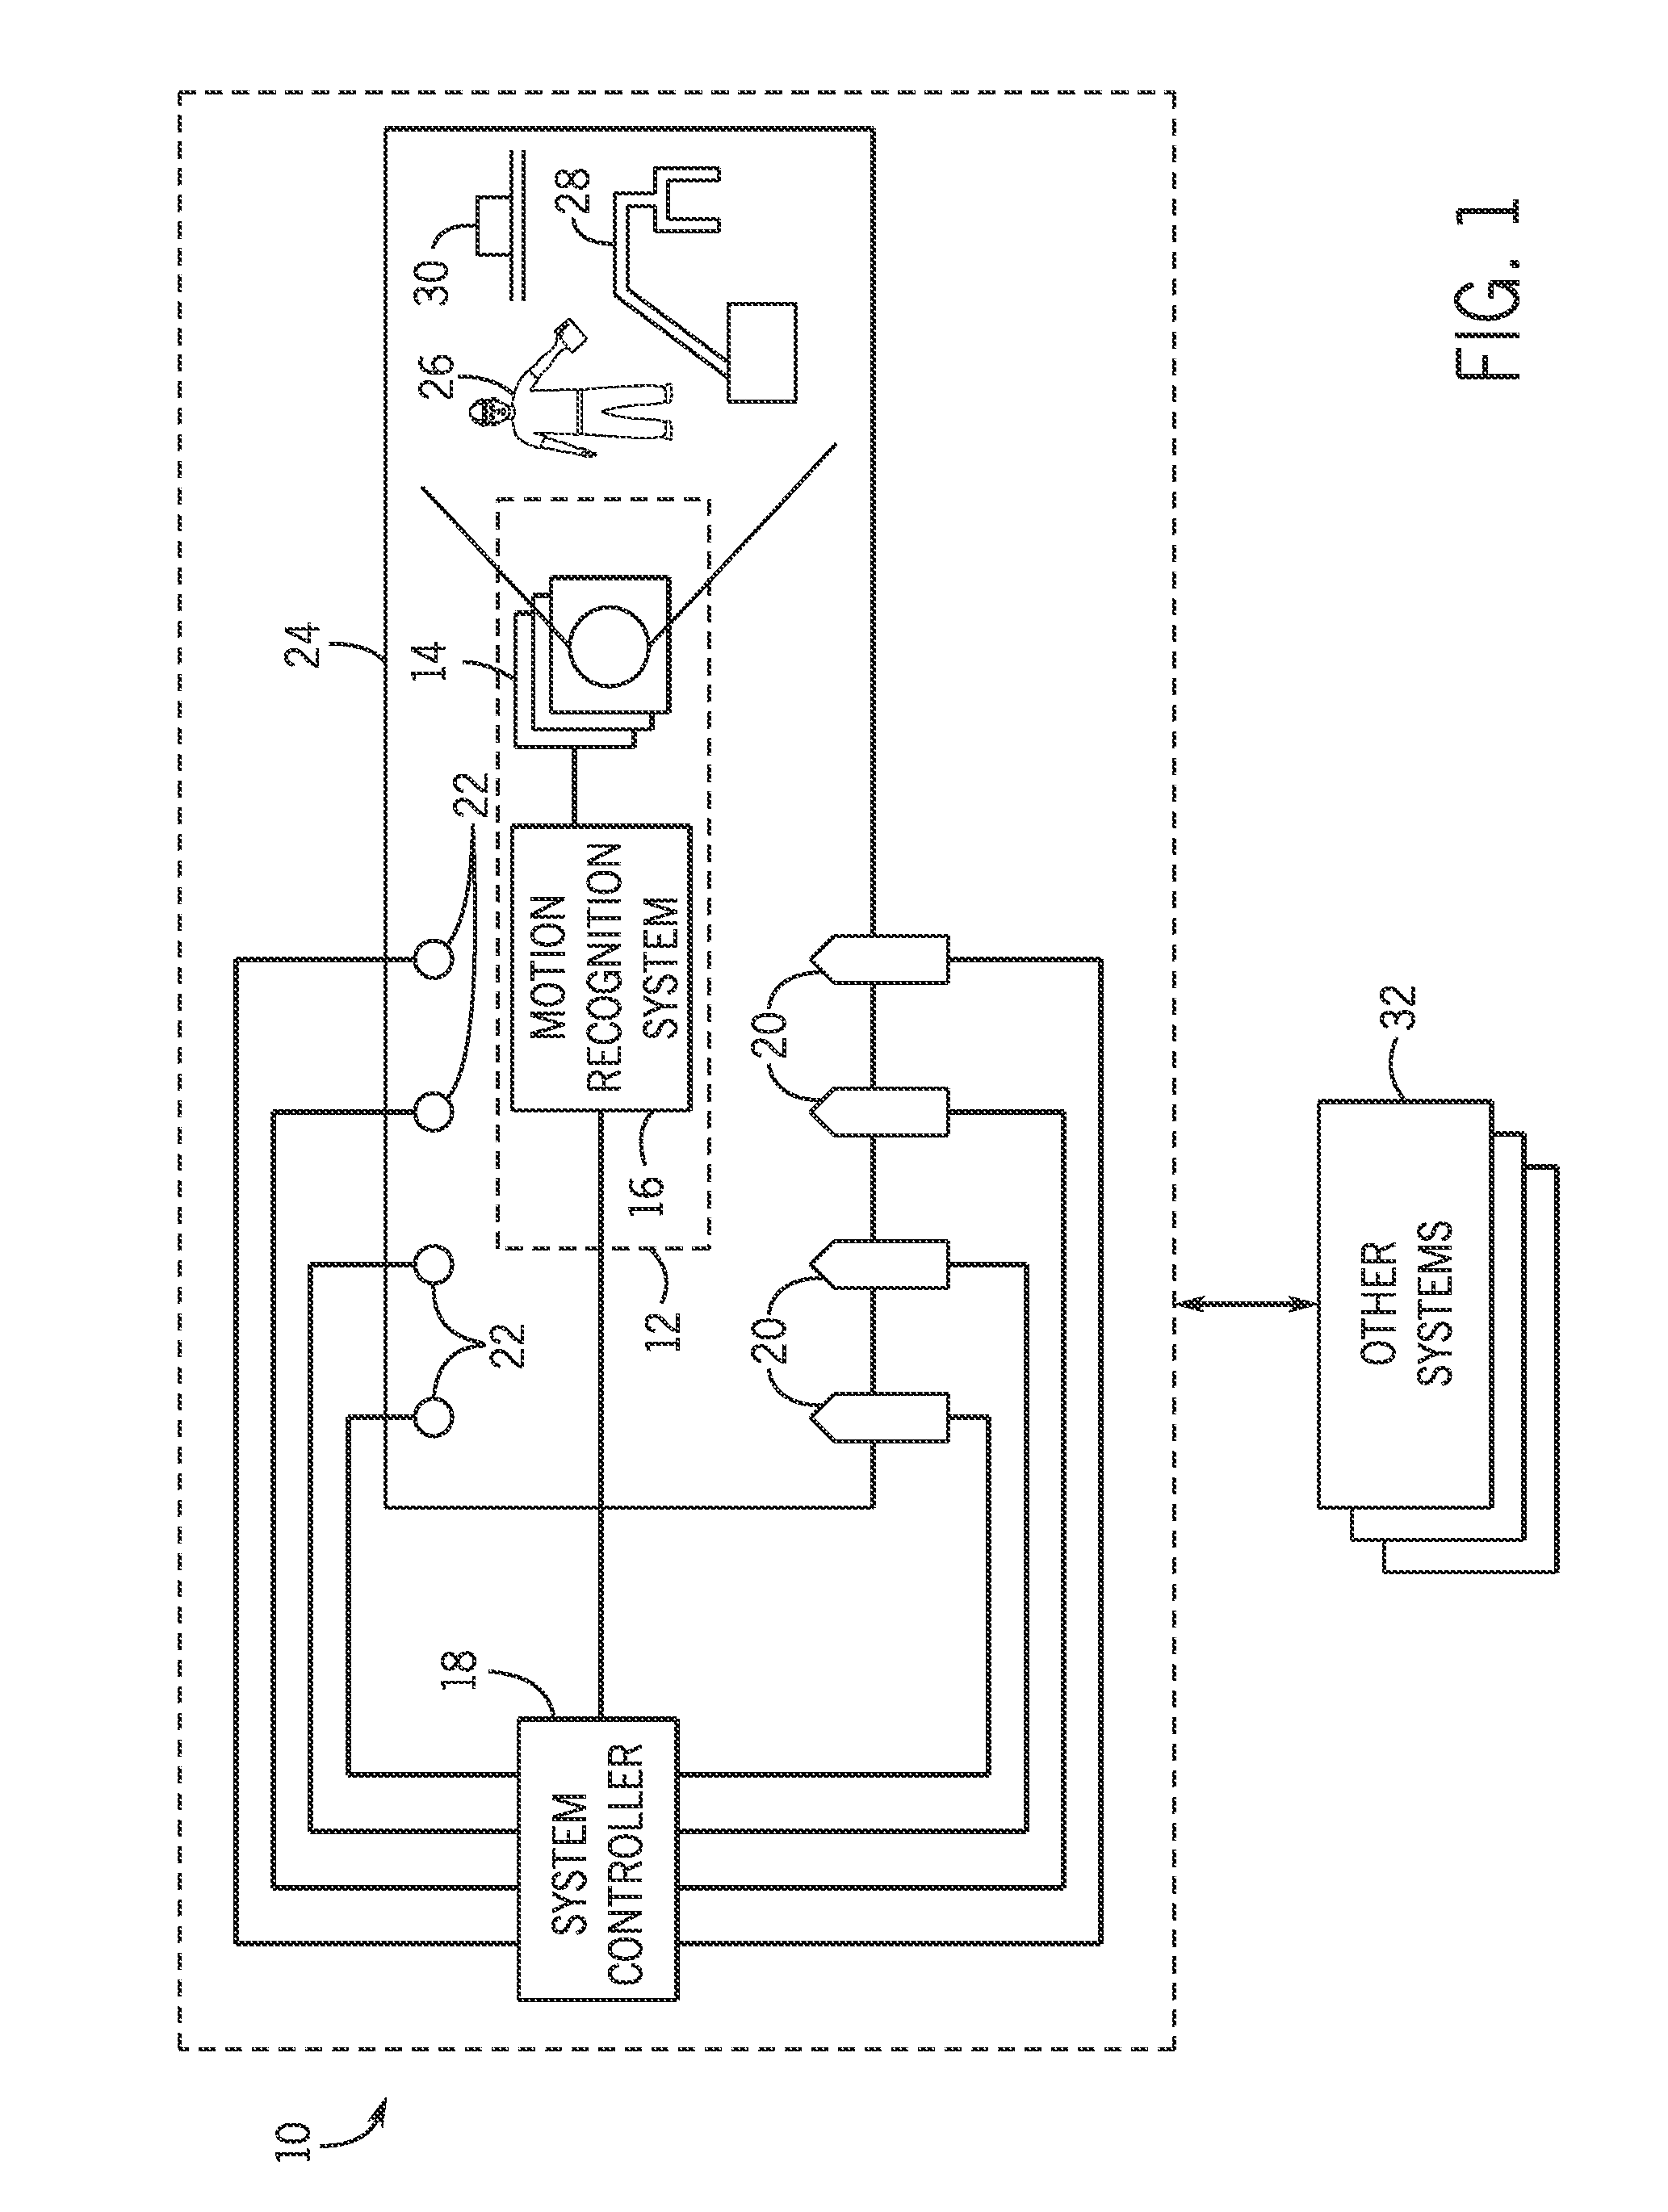 Recognition-based industrial automation control with person and object discrimination